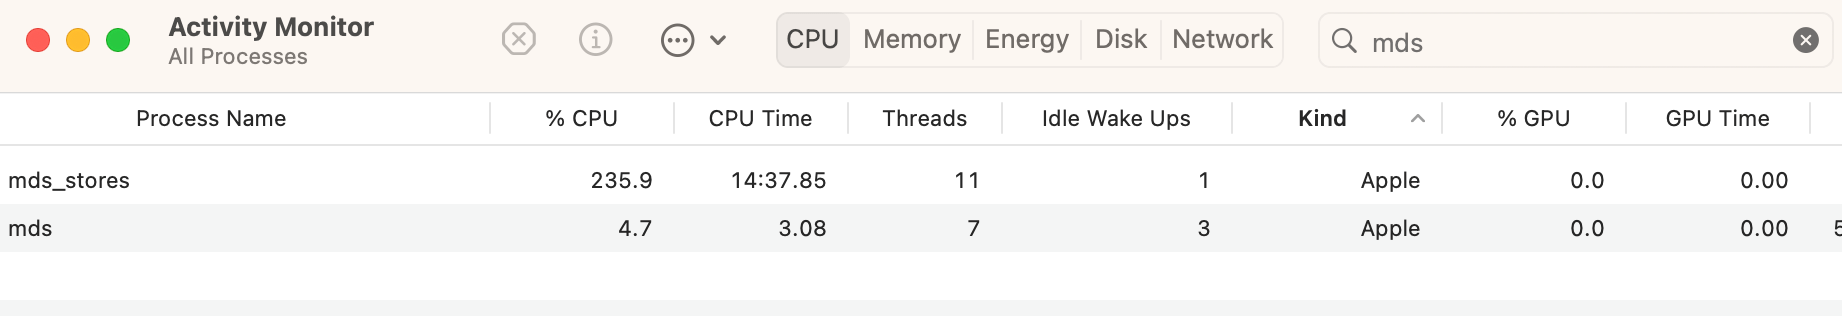 mds_stores showing CPU use